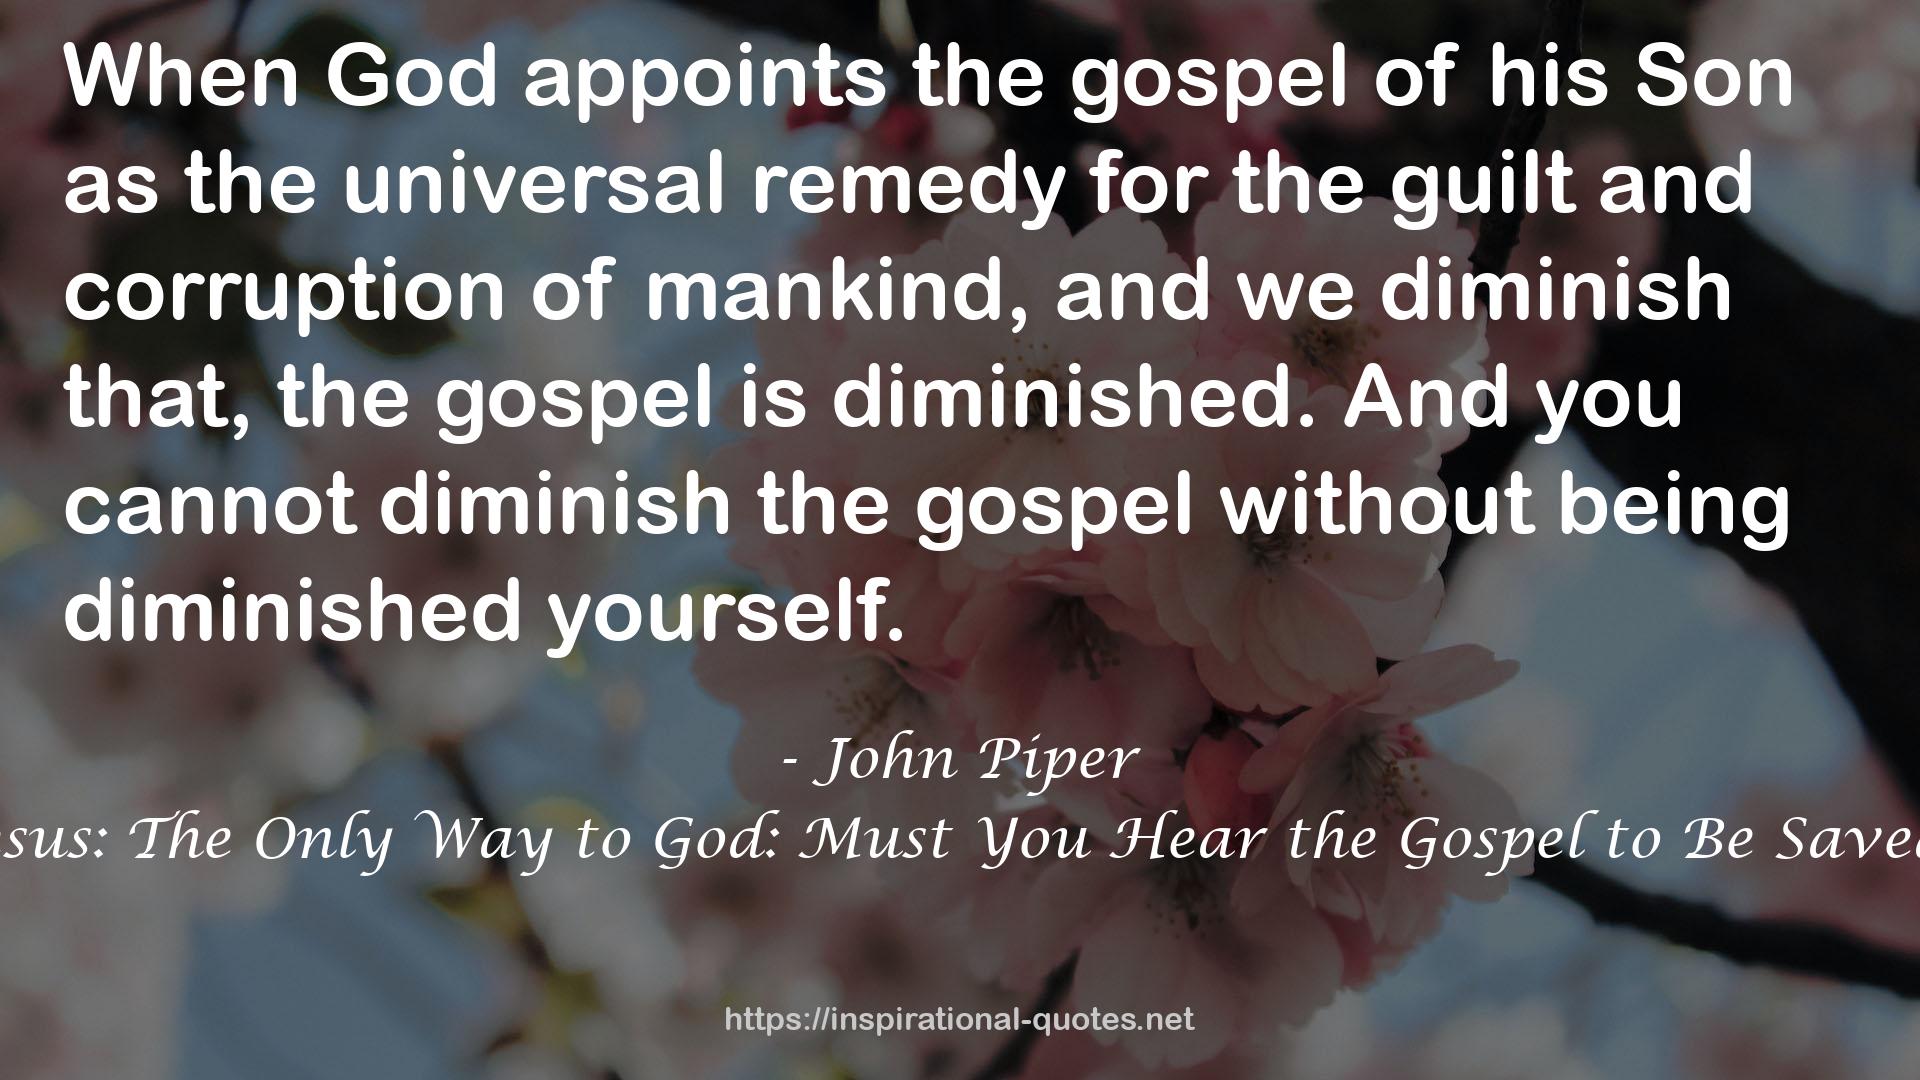 Jesus: The Only Way to God: Must You Hear the Gospel to Be Saved? QUOTES